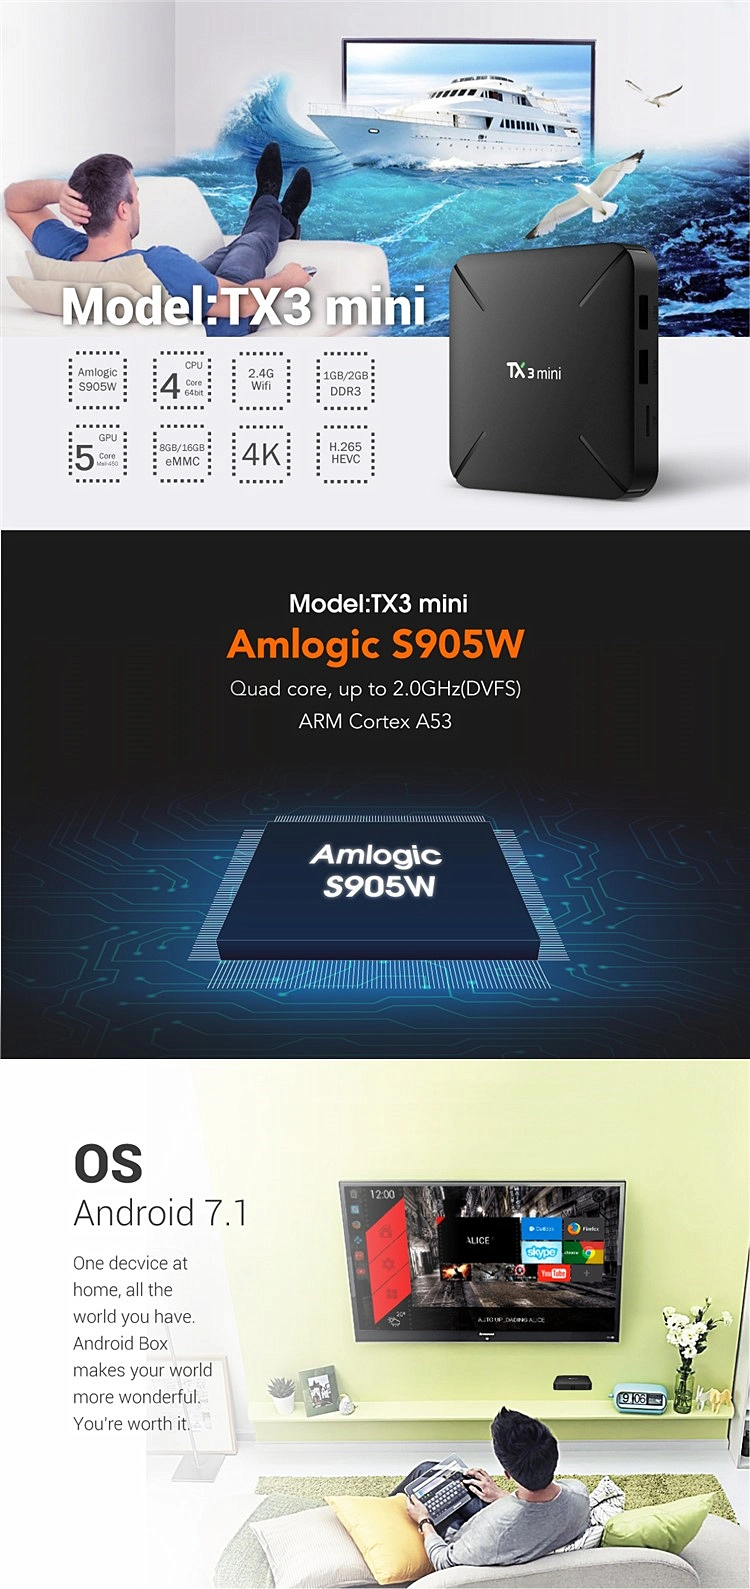 Box Internet TV Set Top Box Tx3 Mini-L S90W 1g 8g Streaming Media Player Internet TV Receive 2018 Best Smart TV Box Android 7.1